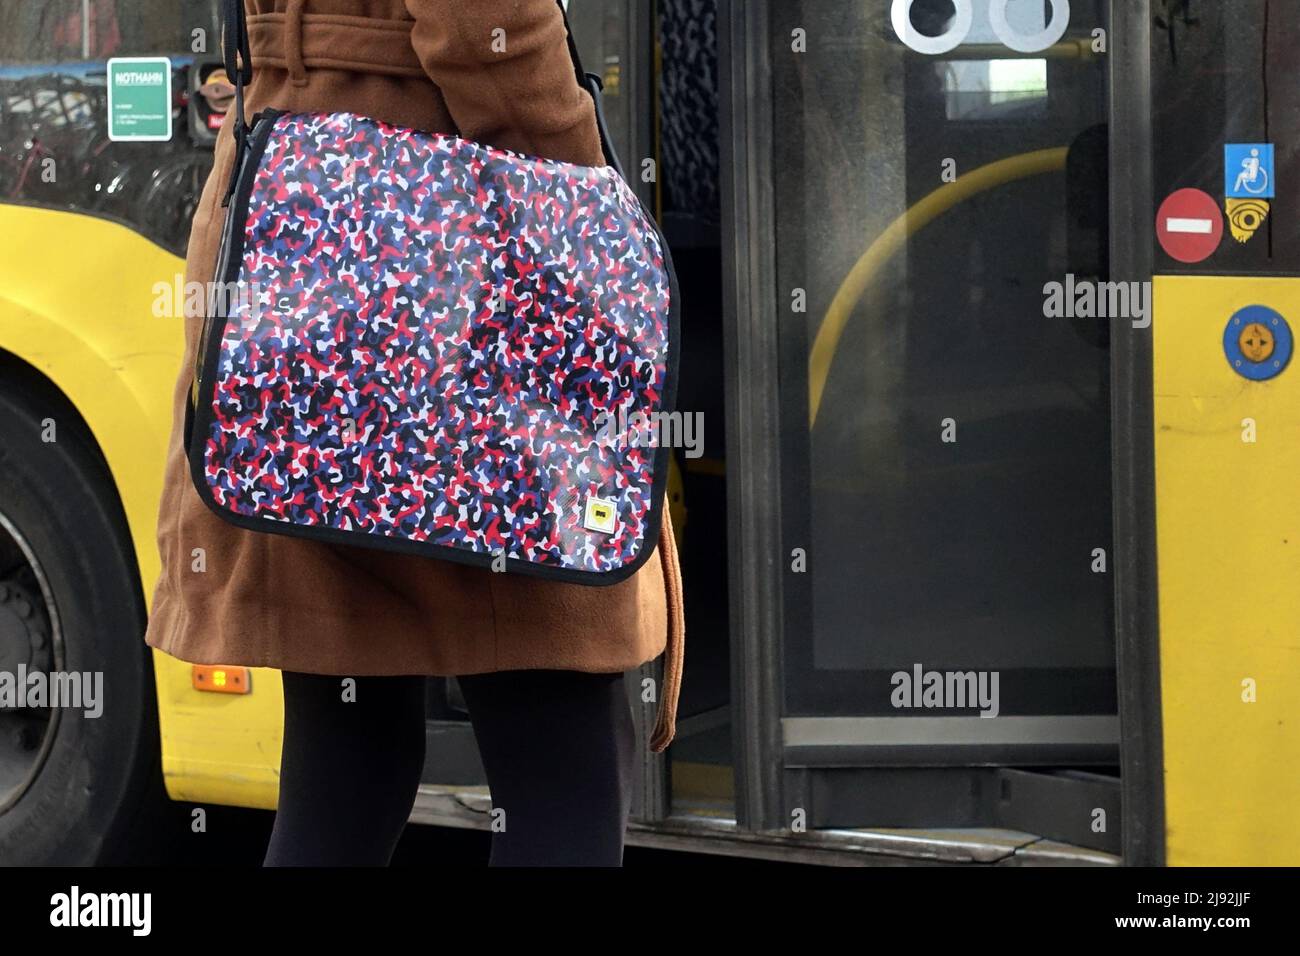 22.02.2022, Berlin, , Germany - Bag of the BVG with the Urban-Jungle design.  Due to a copyright dispute, the design may no longer be used by BVG. 00S2  Stock Photo - Alamy